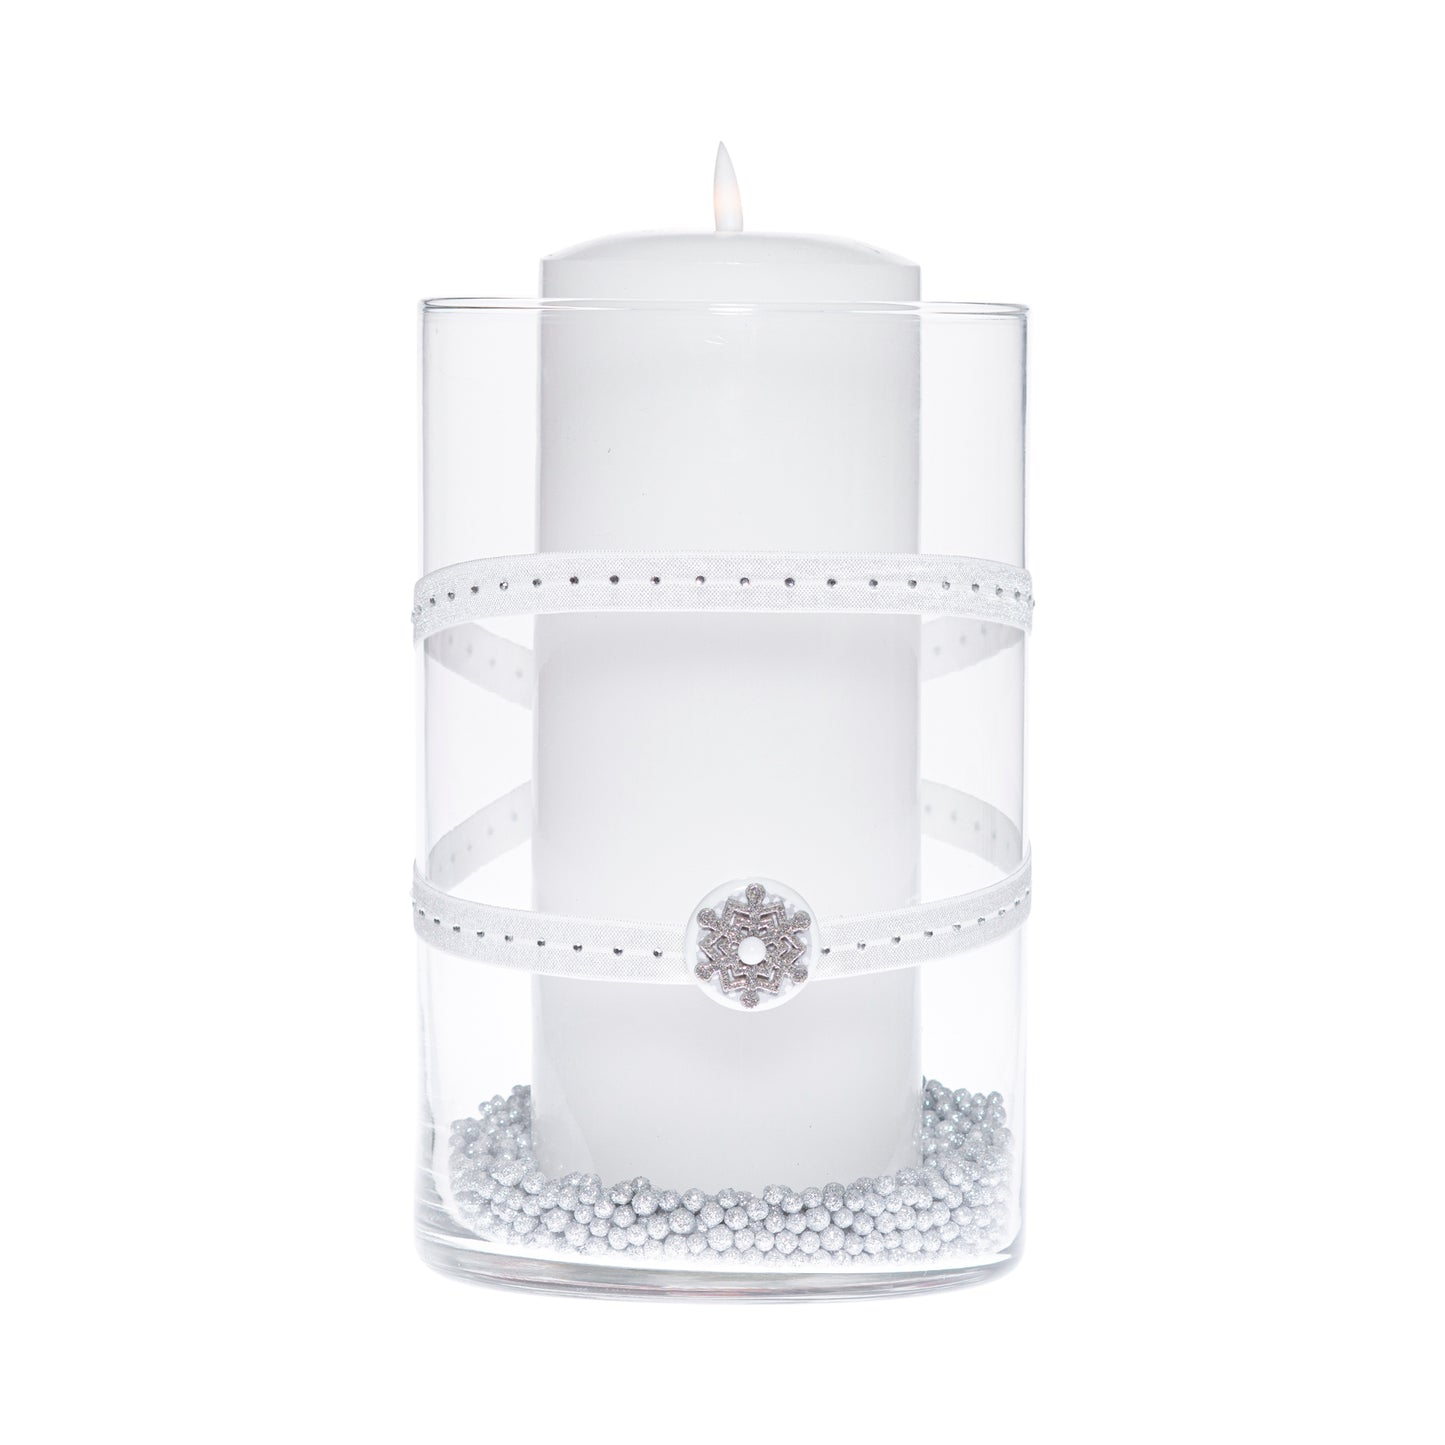 6" x 10" Cylinder White Silver Rhinestone 1X 2 White Gem Wooden Snowflake Holiday Collection Complete Set FREE SHIPPING